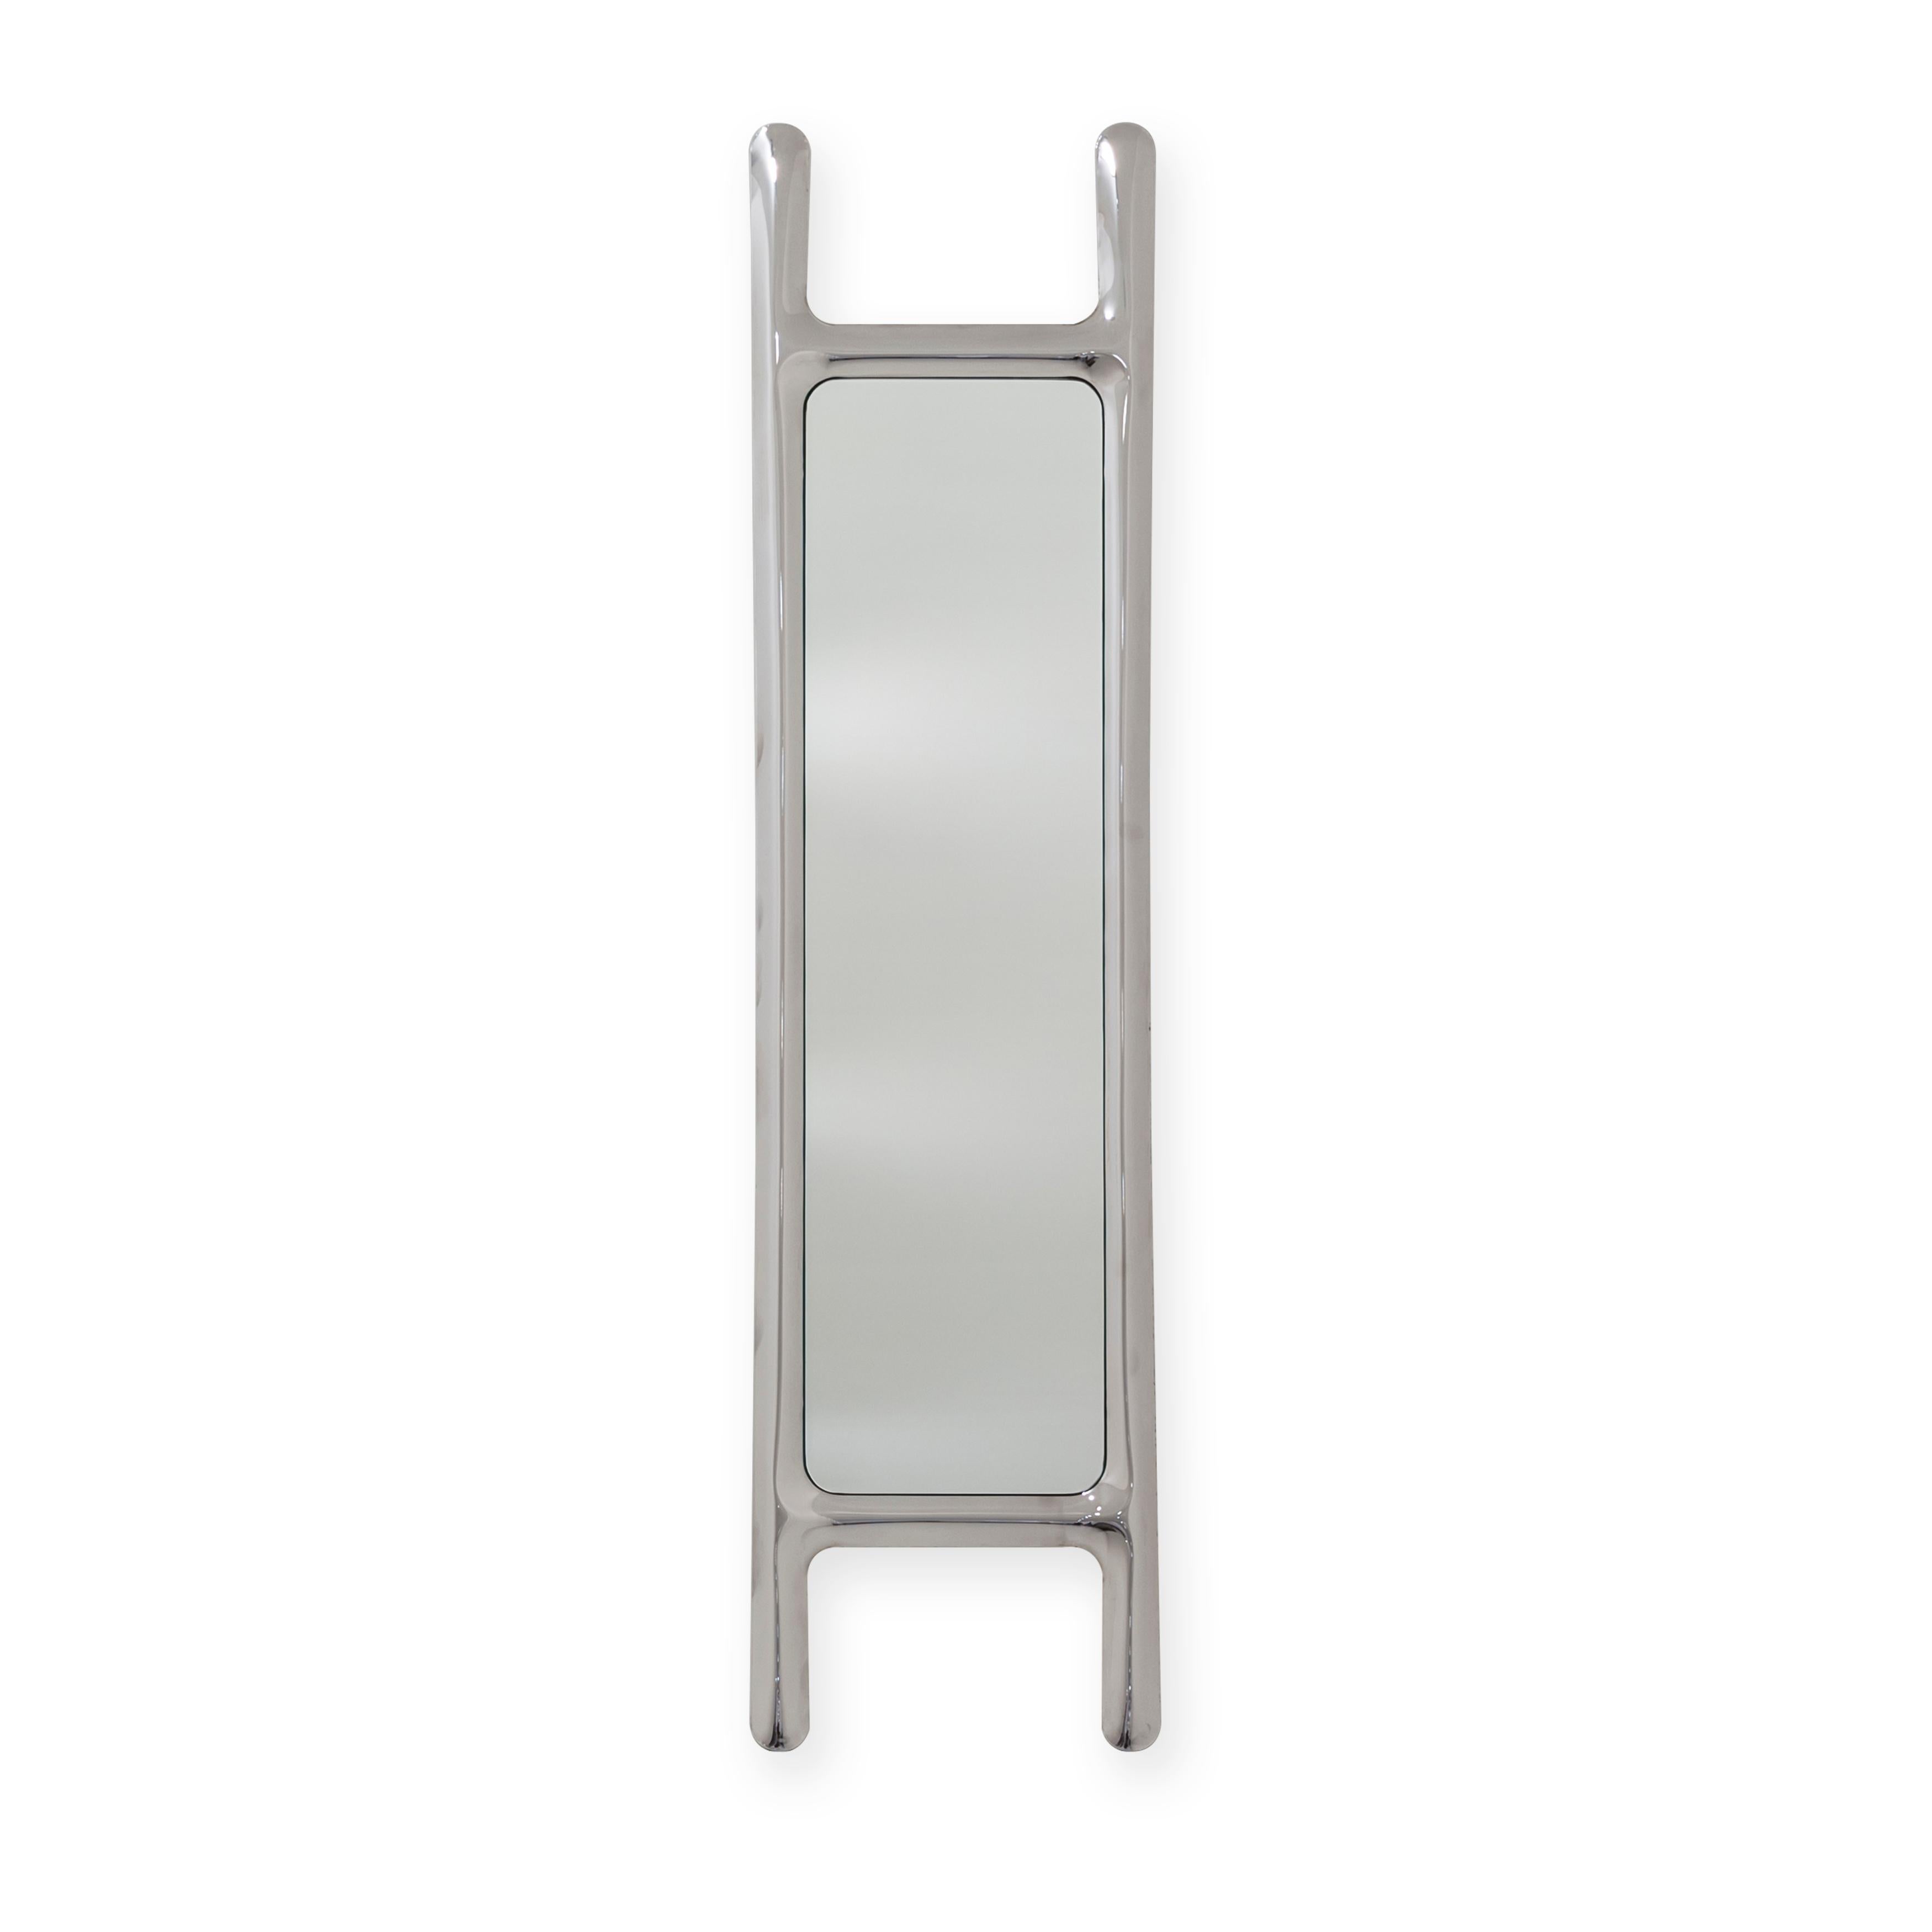 Stainless steel drab sculptural wall mirror by Zieta
Dimensions: D 6 x W 46 x H 188 cm 
Material: Mirror, stainless steel. 
Finish: Polished.
Also available in colors: stainless steel, or powder-coated. 


A DRAB mirror is an object that